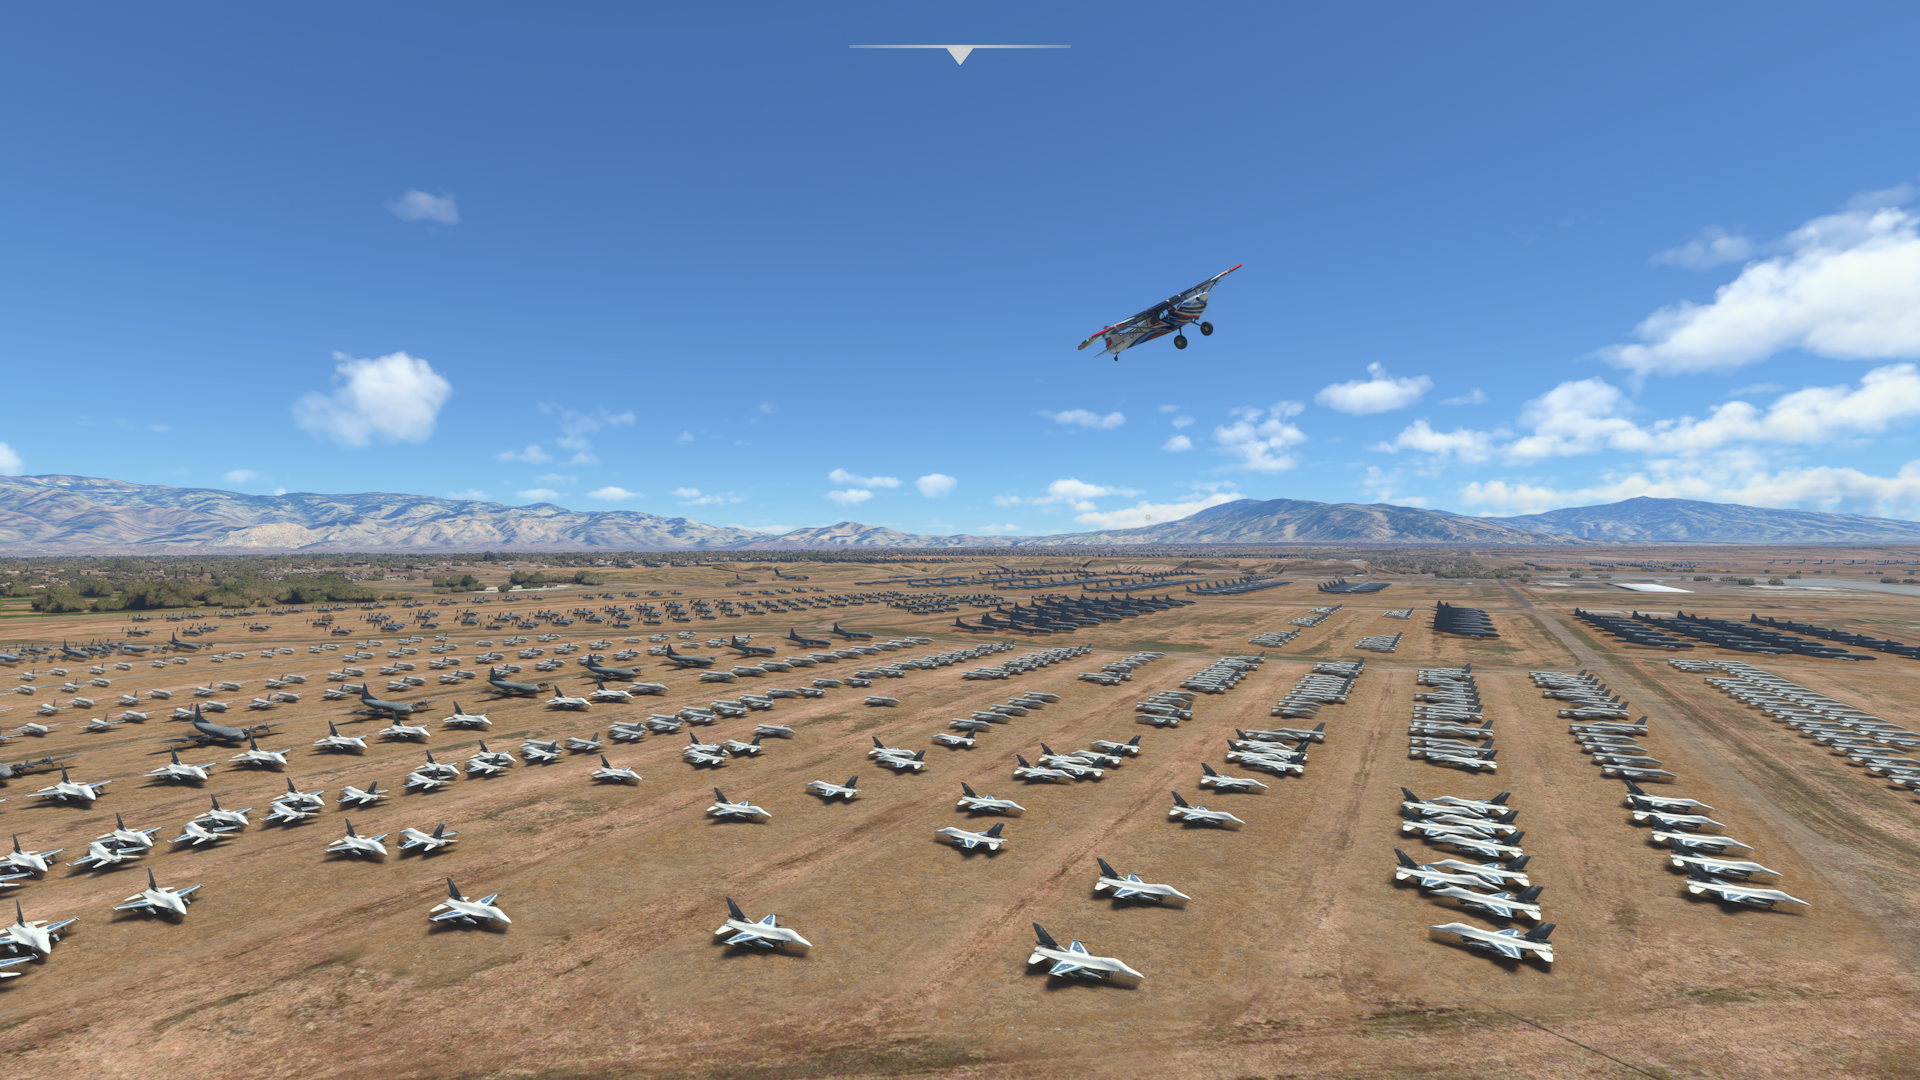 Flight over the plane cemetary in Arizona with a CubCrafters XCub | Microsoft Flight Simulator